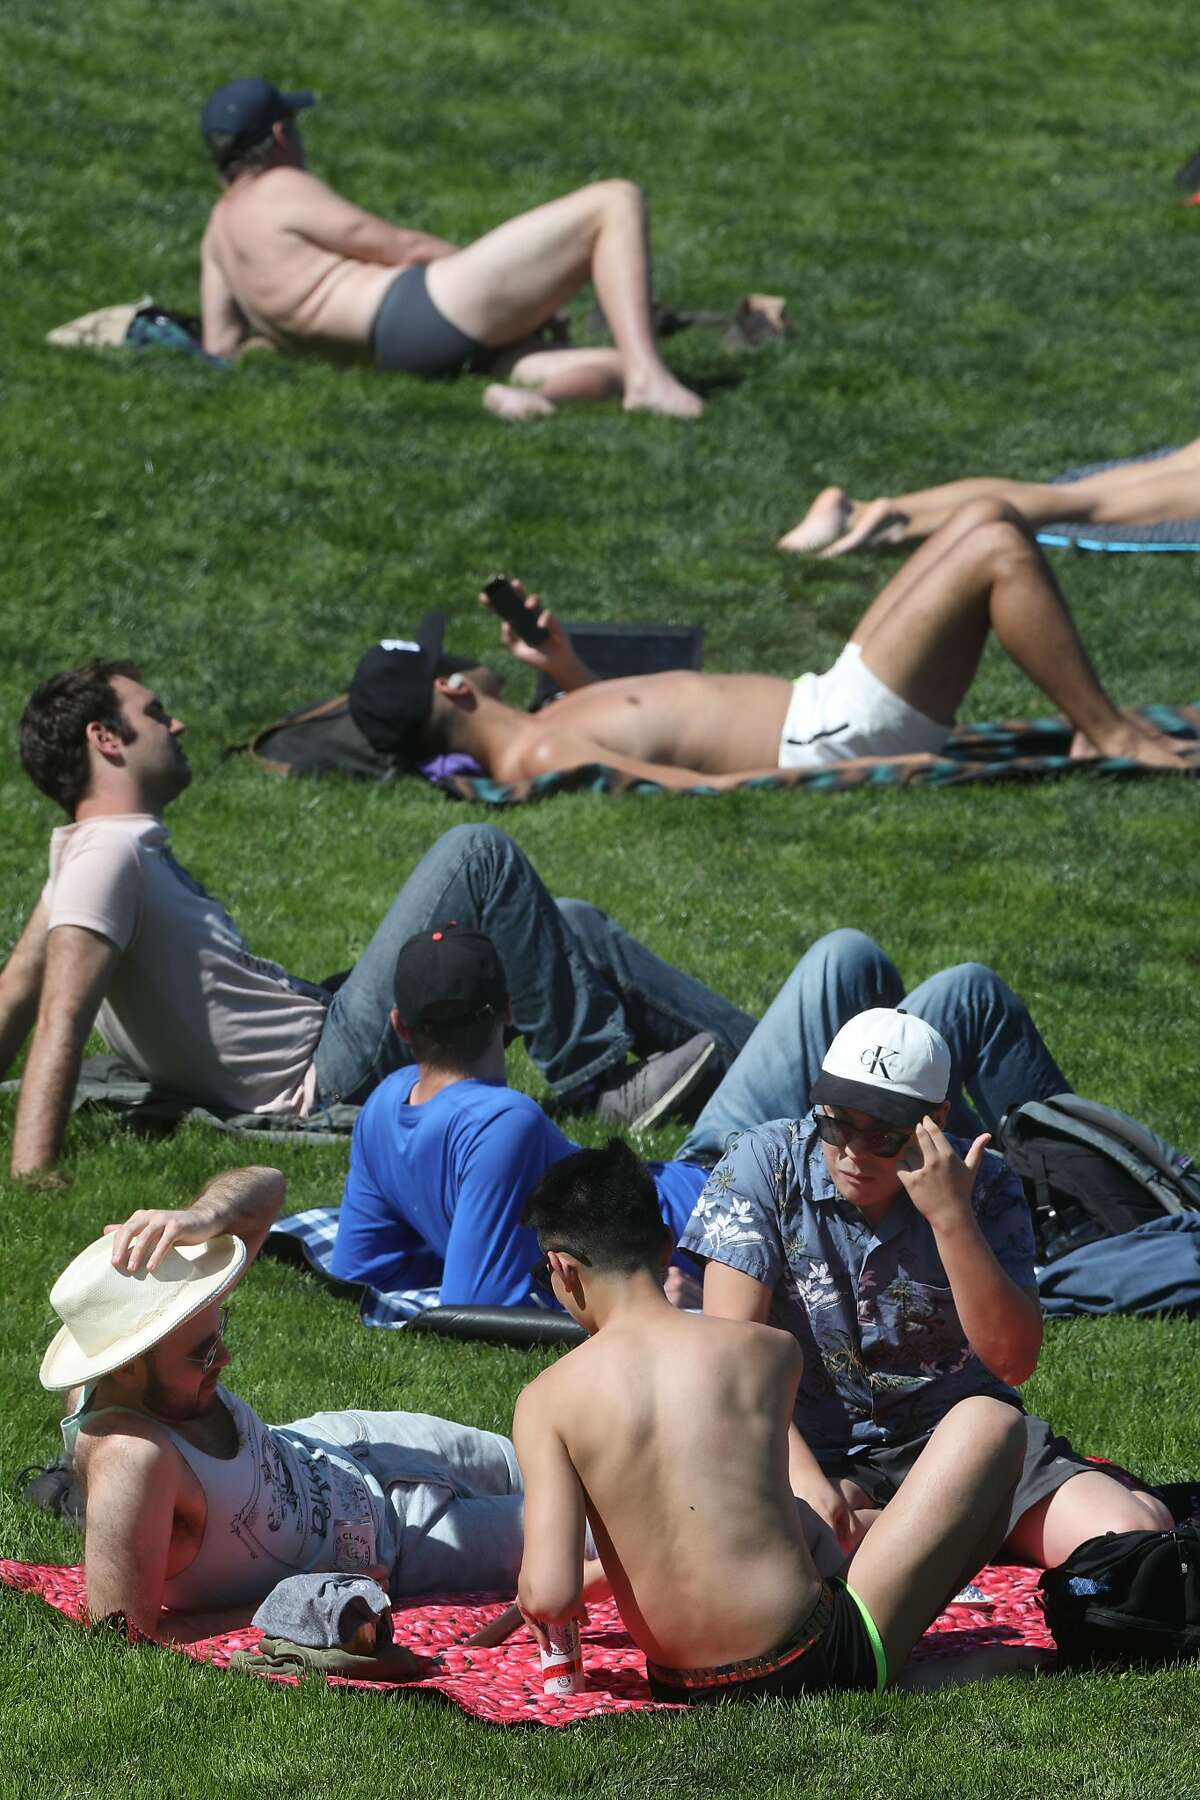 Sunbathers seen at Dolores park today on Tuesday, April 14, 2020, in San Francisco, Calif.